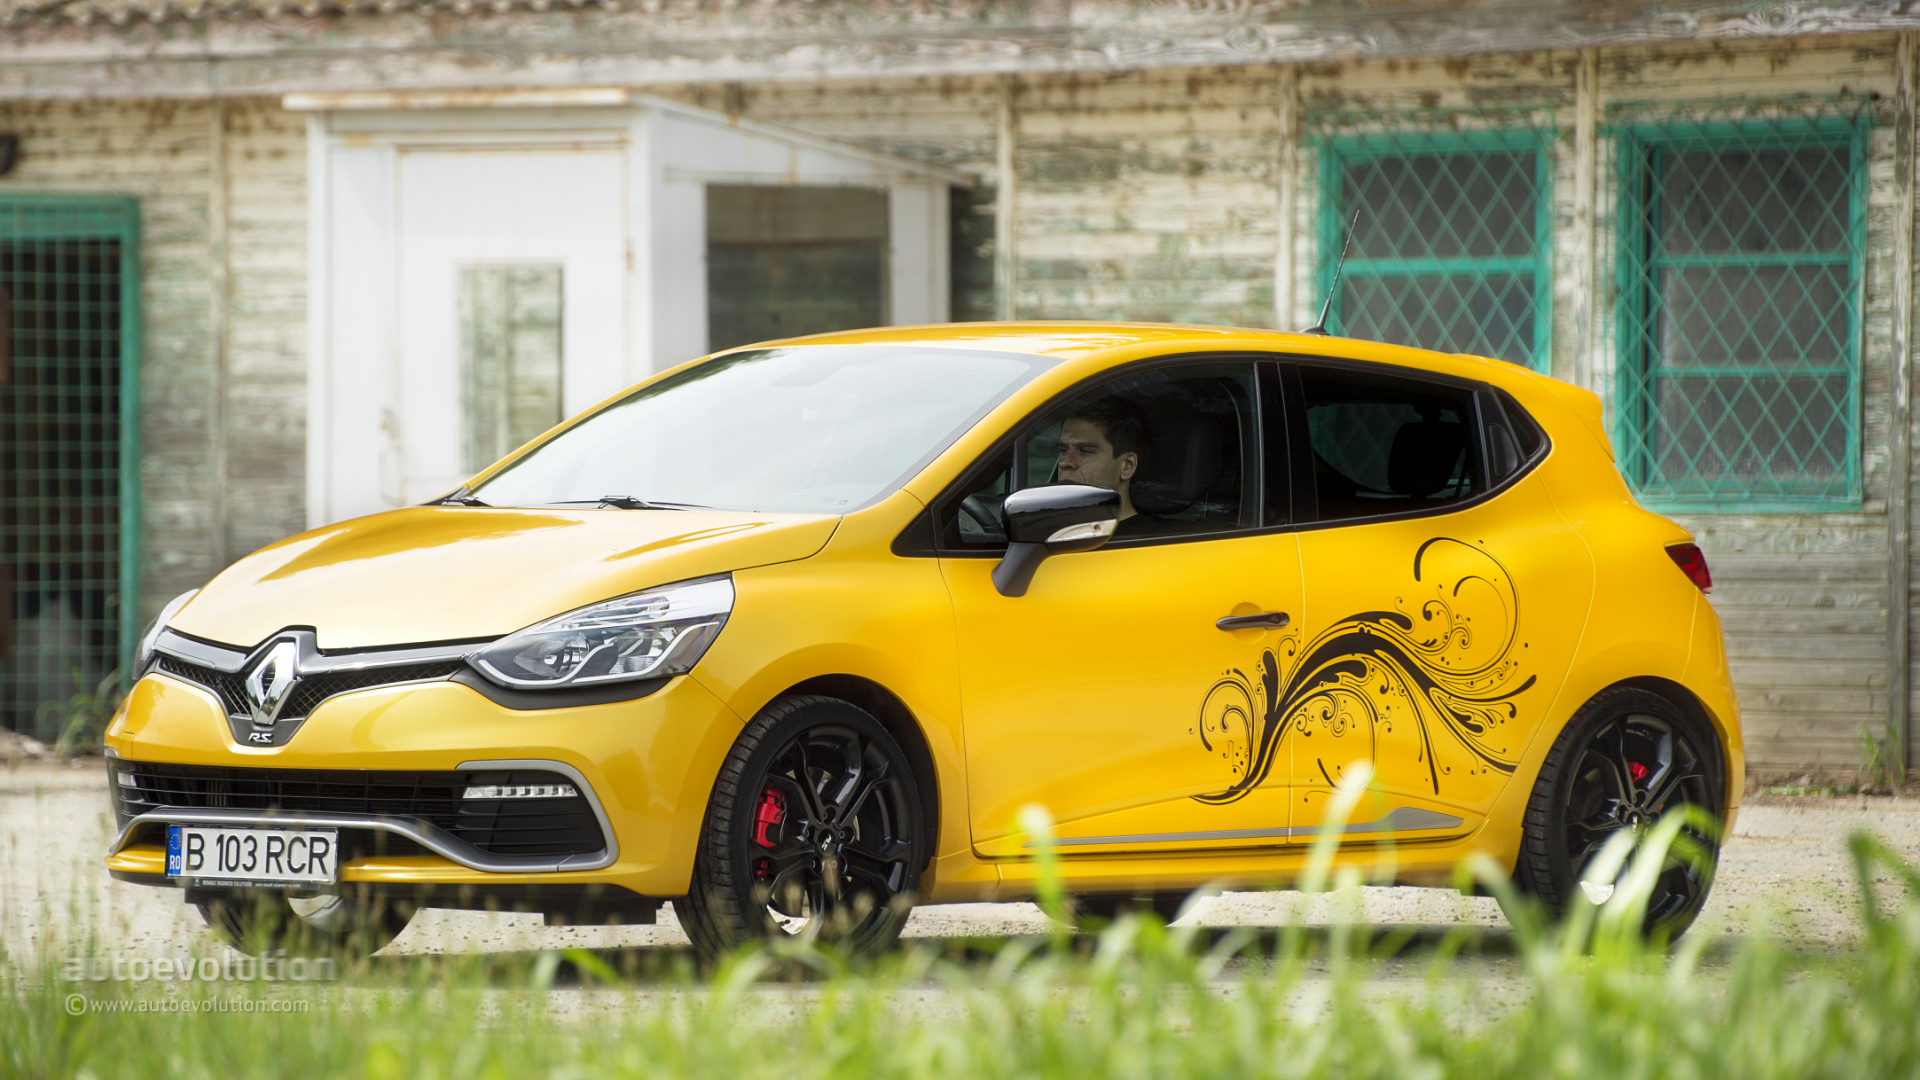 RENAULT Clio RS 200 photo gallery 56 pictures